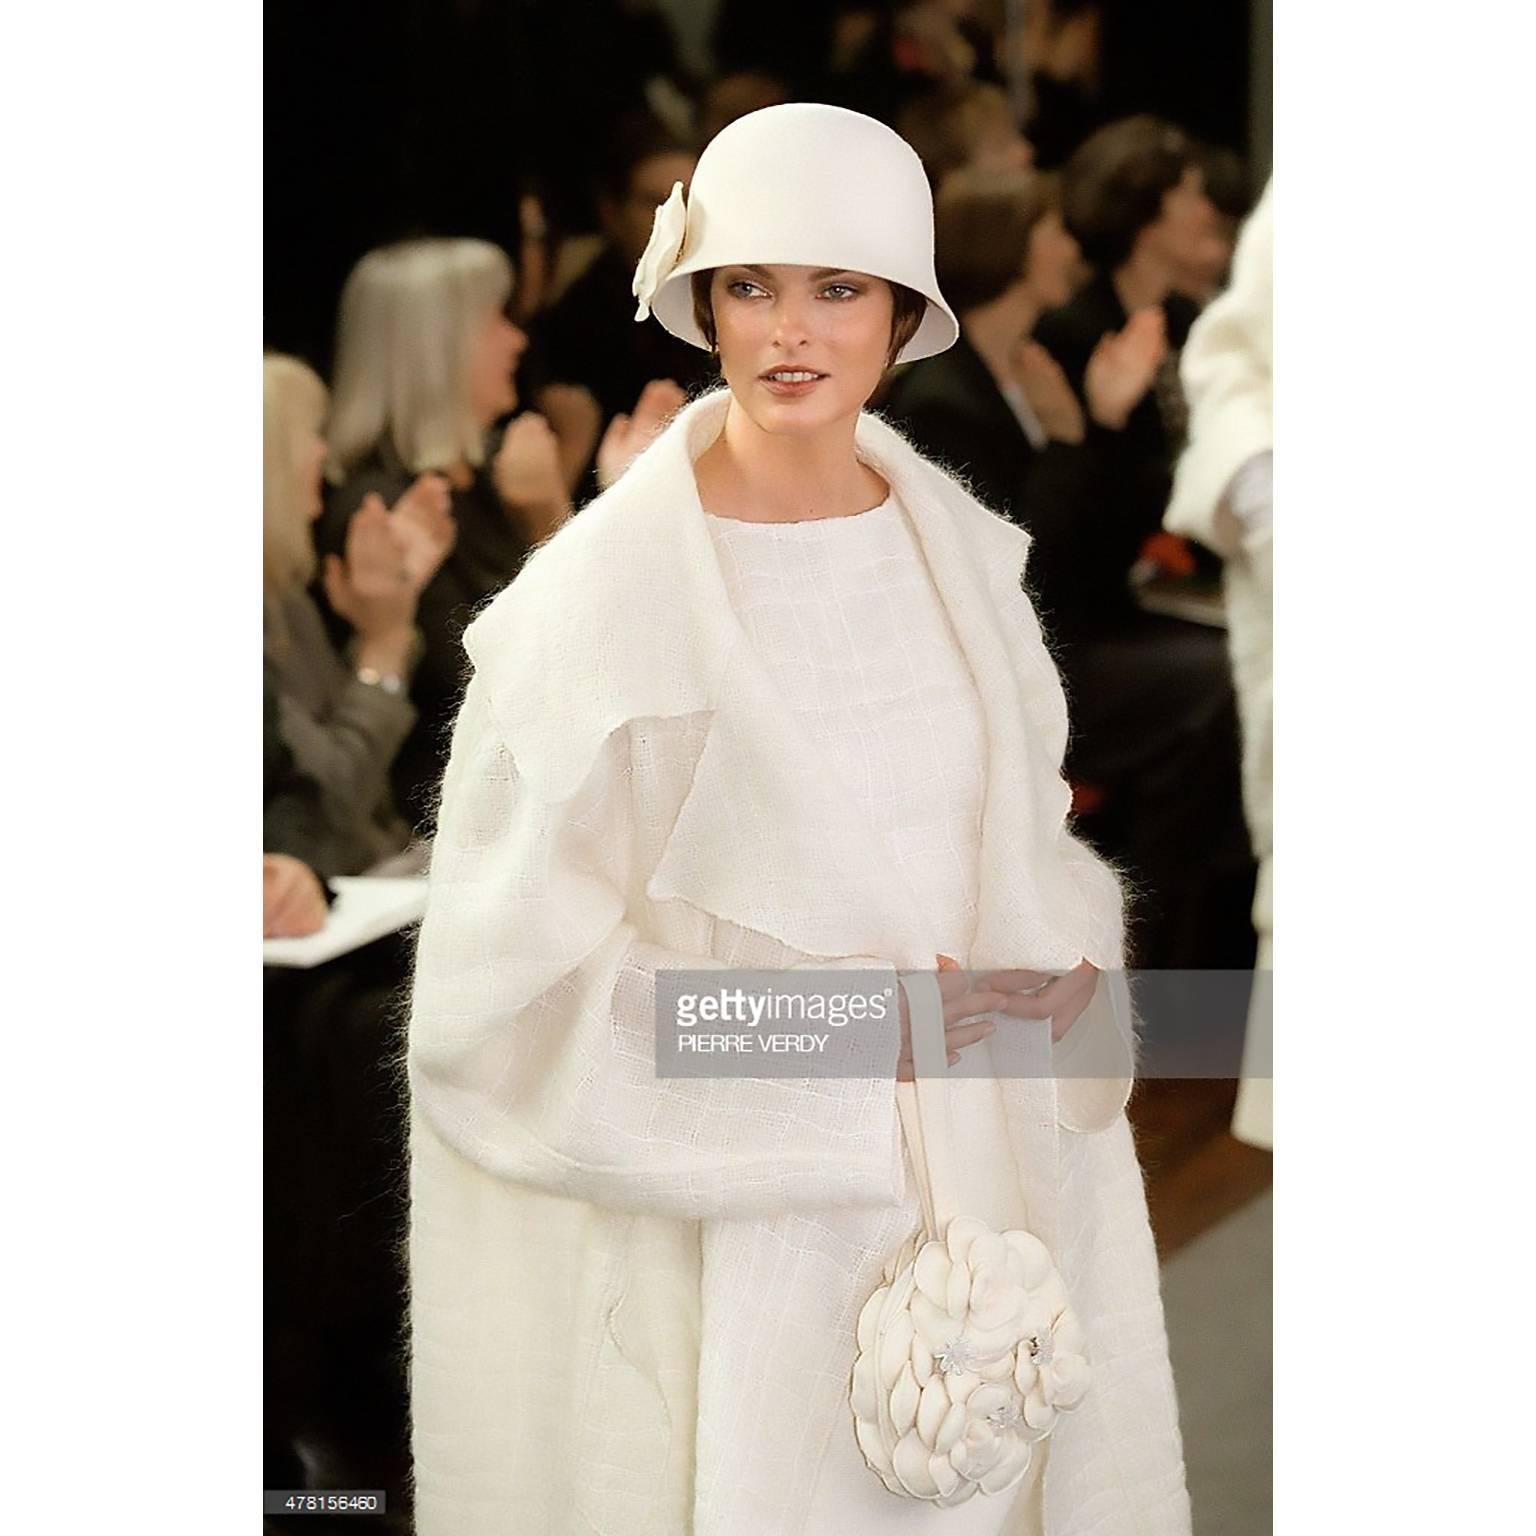 This Chanel coat is from Chanel's Autumn Winter 1998 collection and the same style was modeled by Linda Evangelista on the runway. The coat is loosely woven in a cream wool and mohair blend and because it has such an airy, lightweight feel, it would